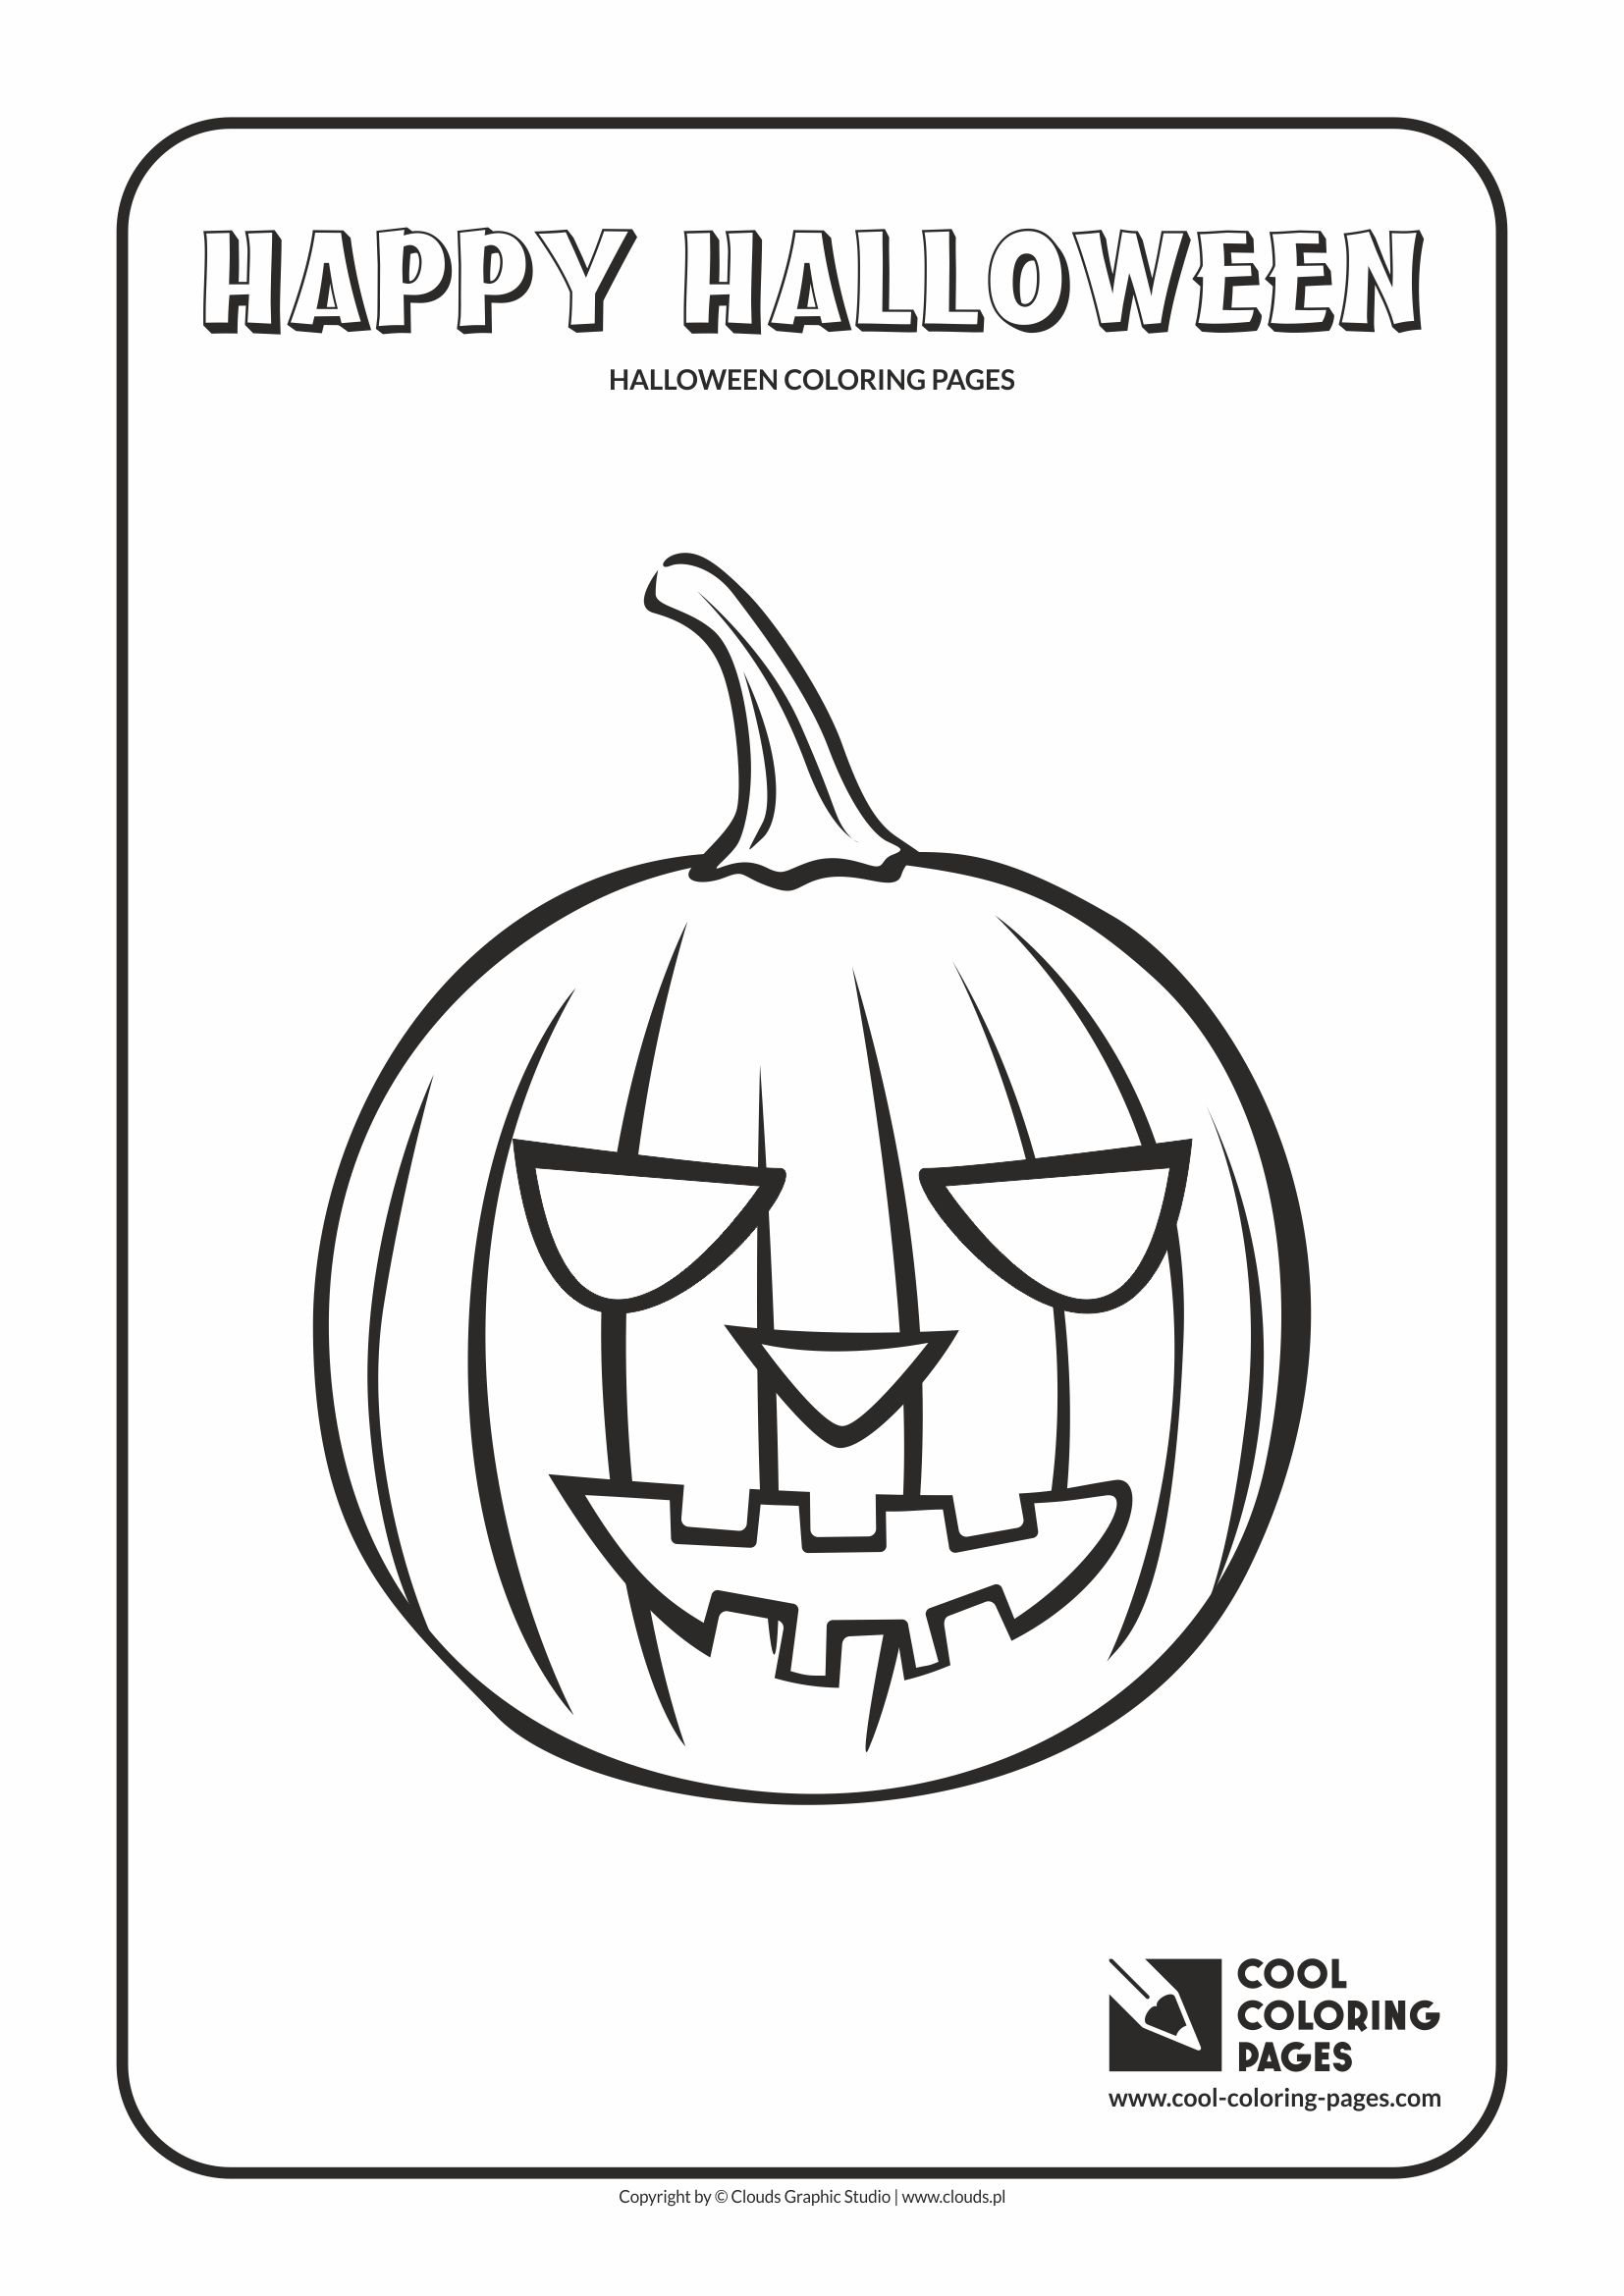 Cool Coloring Pages Halloween coloring pages - Cool Coloring Pages ...